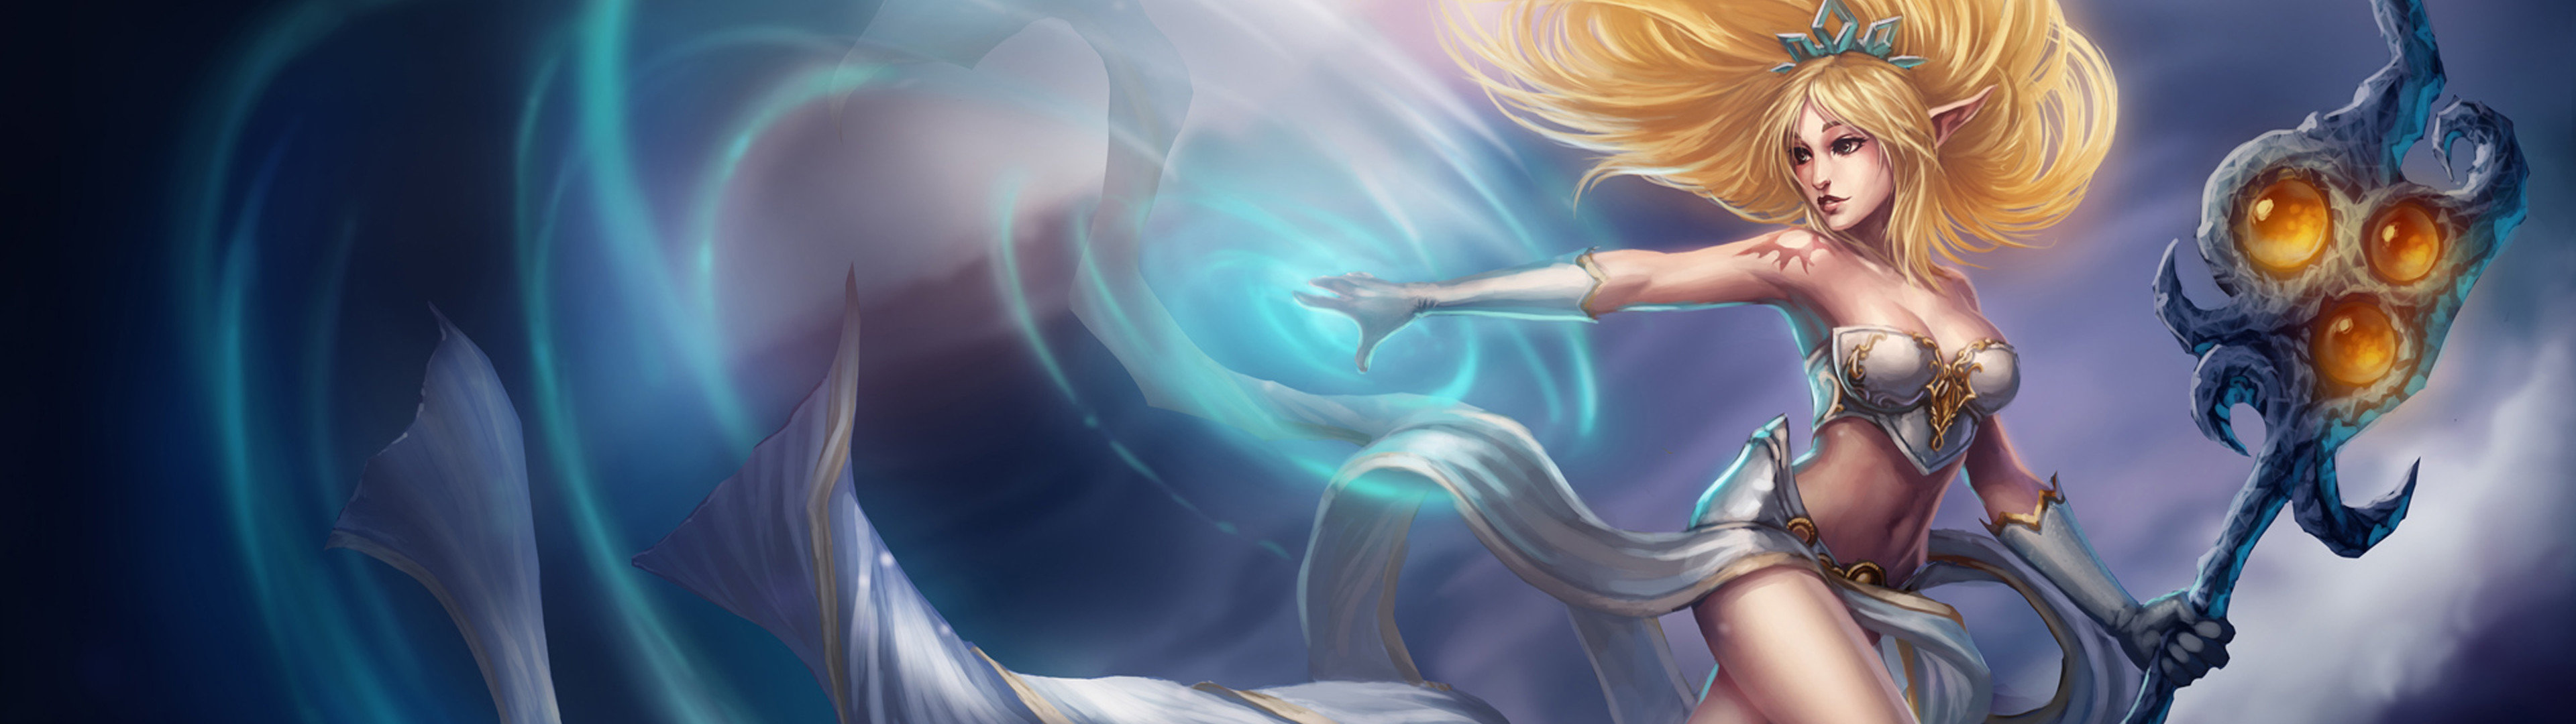 Dual Monitor Janna League Of Legends Wallpapers Hd Backgrounds Images, Photos, Reviews